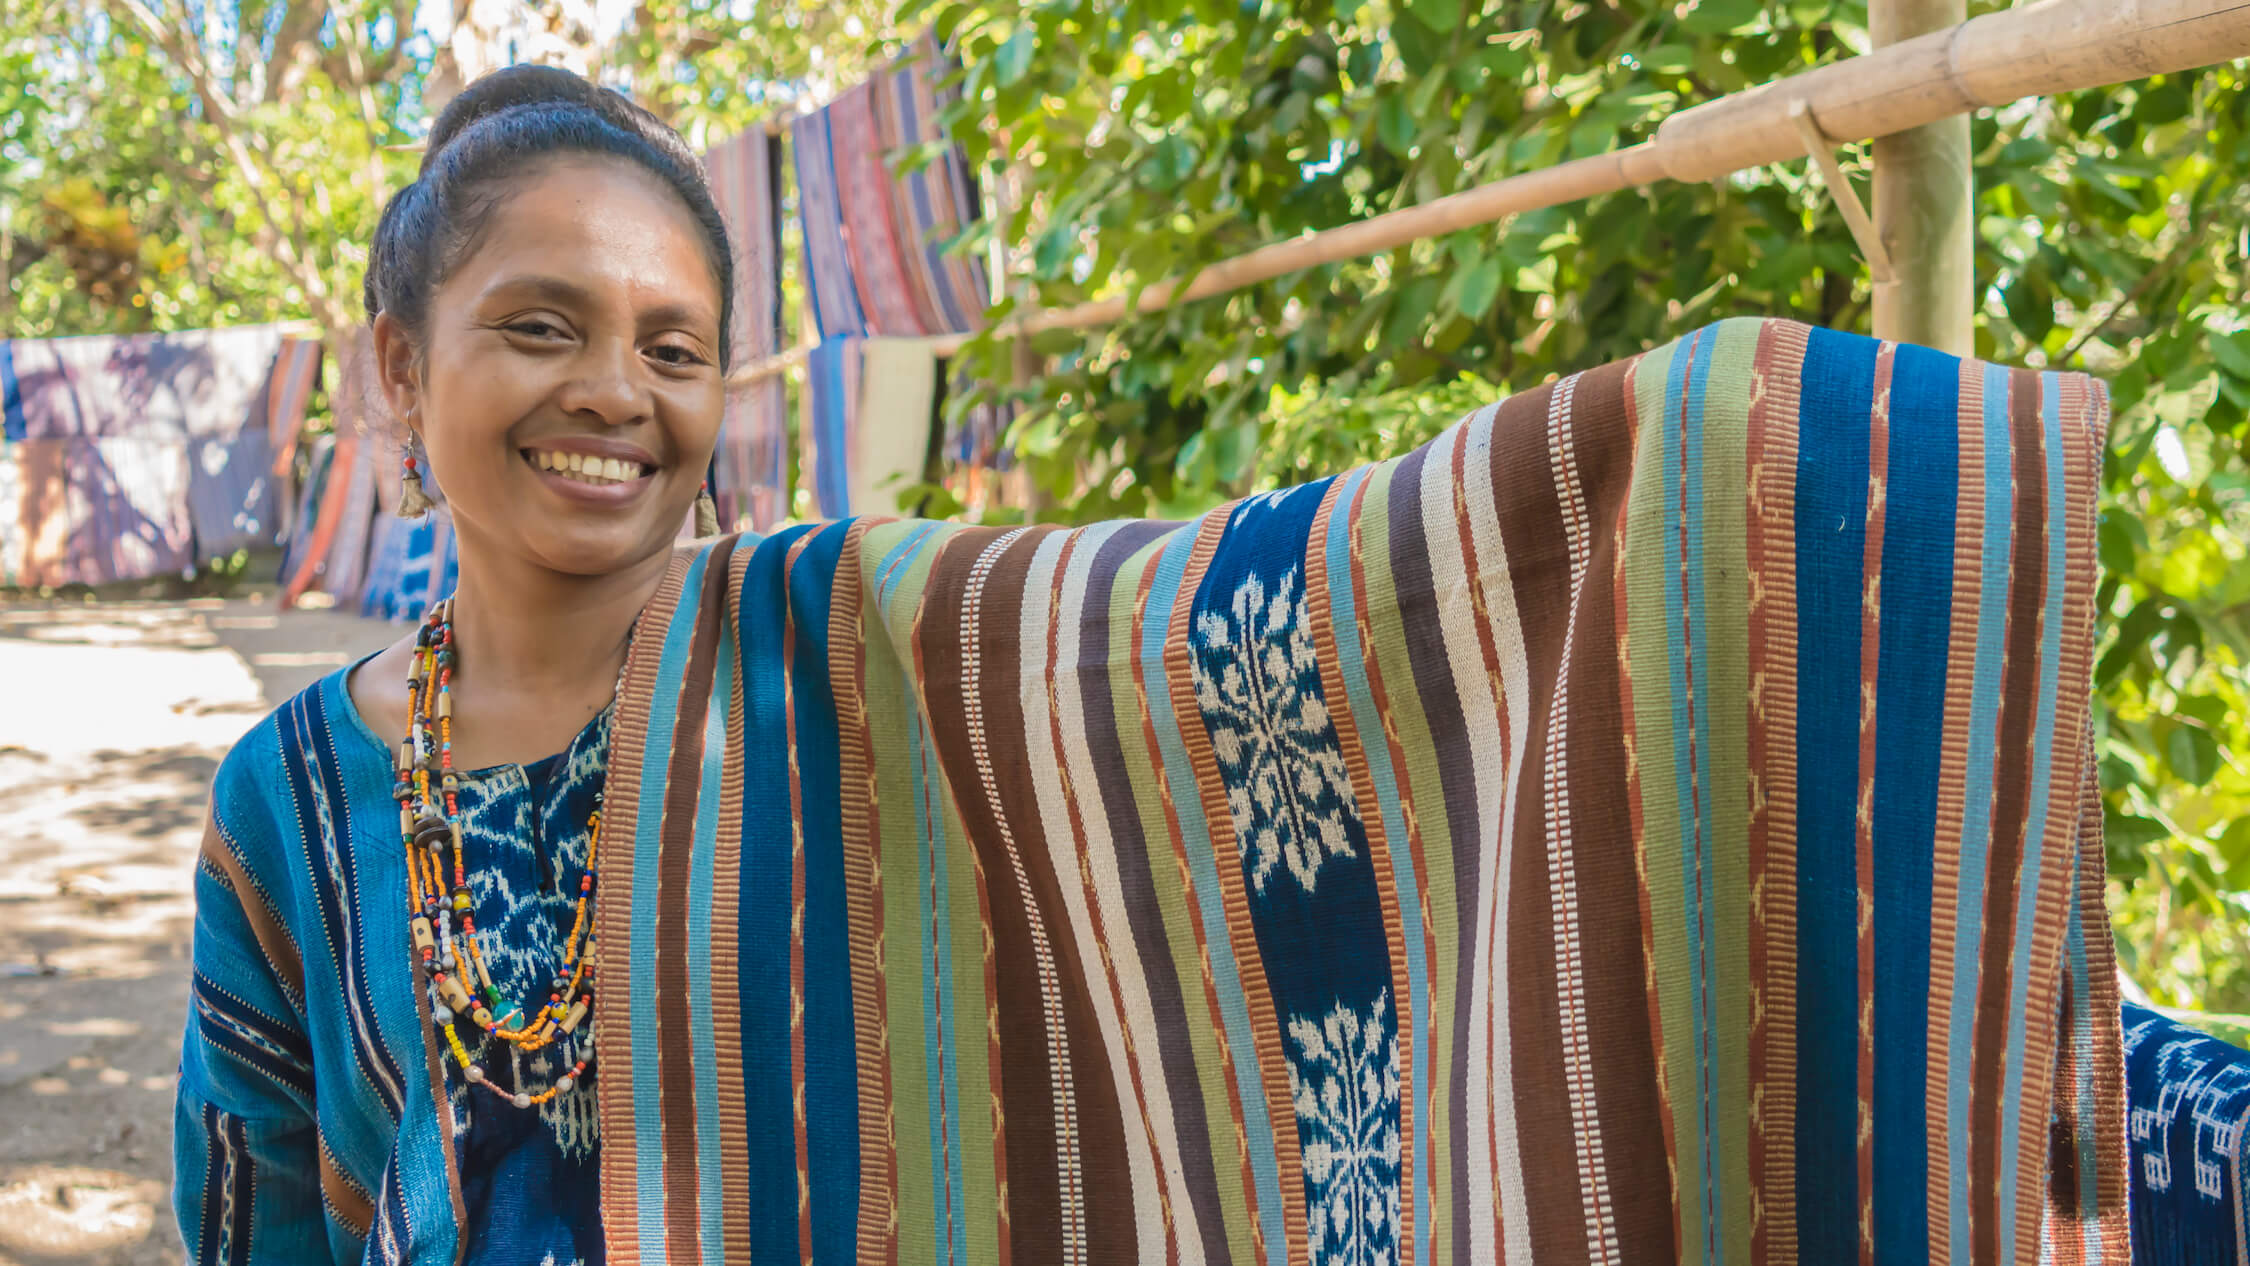  Maria Genisa and her blanket, coloured using dyes made from indigo (blue and green), turmeric and mango bark (yellow and green), morinda (brick red) and mangrove roots (chocolate brown). Photo by Andra Fembriarto